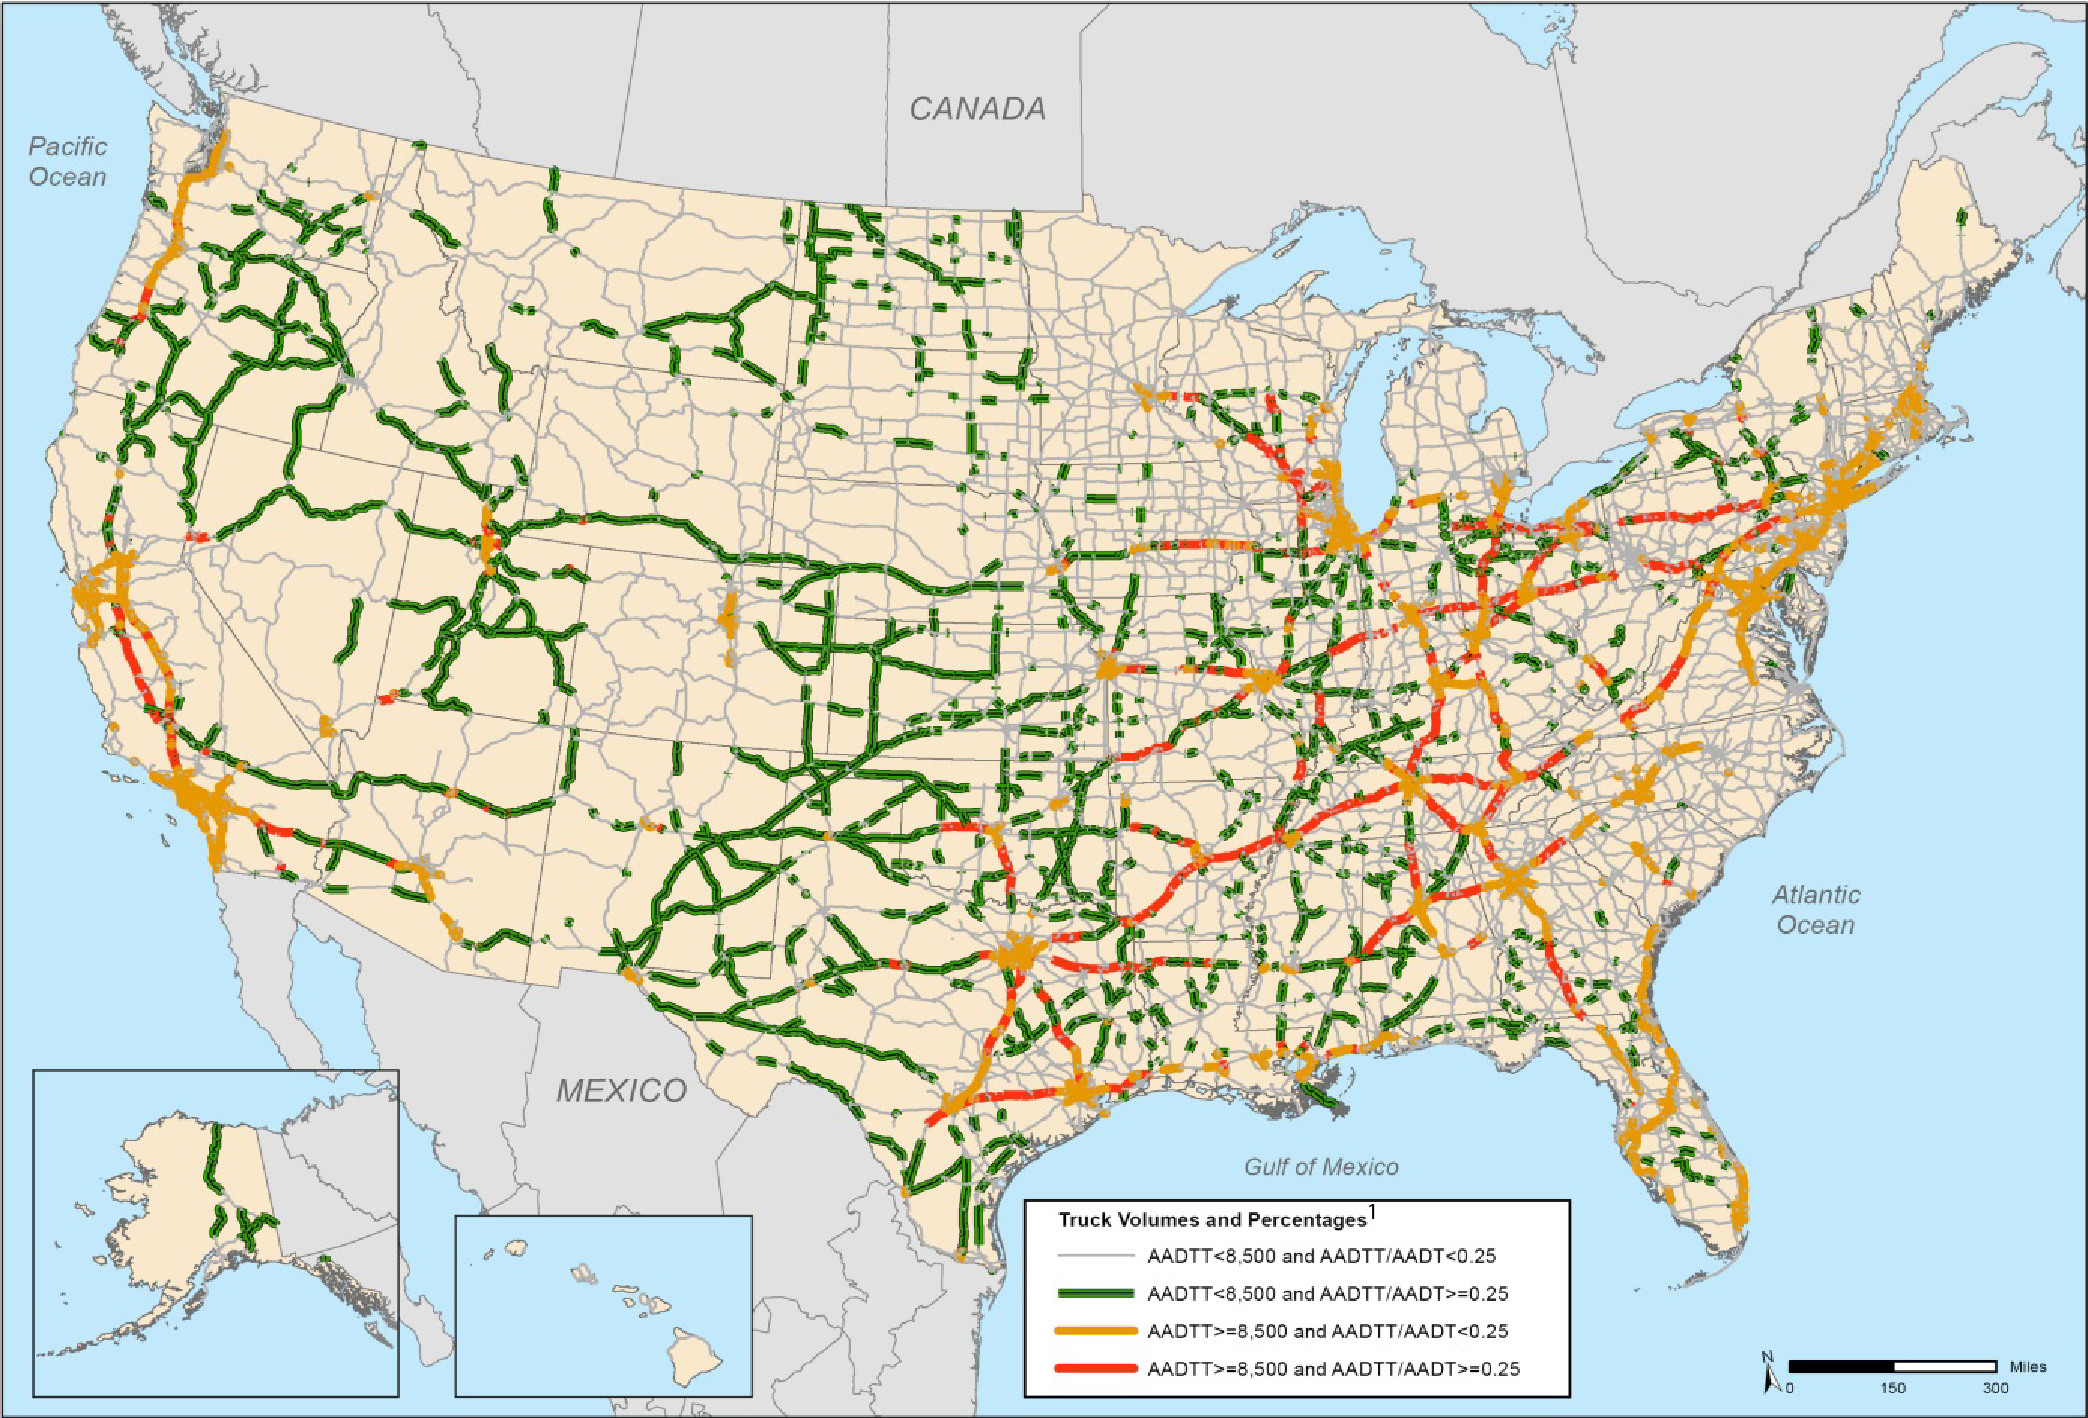 An outline map of the 48 contiguous states and insets for Alaska and Hawaii shows the interstate and non-interstate routes for freight on the National Highway System. The routes characterized by AADTT volume of 8,500 or more and AADTT over AADT of 0.25 or more stretch from New York through the Great Lakes states, across the Midwestern states to Oklahoma, and inland into the southern states, as well as from the Great Lakes states south to Florida and Texas, and finally portions of southern California. The routes characterized by AADTT volume of 8,500 or more and AADTT over AADT of less than 0.25 extend through the New England coastal states, portions of the Midwestern states and into Florida, portions of Texas, Southern California, and portions of Washington and Oregon. The routes characterized by AADTT volume of less than 8,500 and AADTT over AADT of 0.25 or more are dispersed in the Midwestern states, the Great Plains states, Texas and remaining western states. The routes characterized by AADTT volume of less than 8,500 and AADTT over AADT of less than 0.25 are more prominent in the eastern half of the country than in the western half. Sources: U.S. Department of Transportation, Federal Highway Administration, Office of Freight Management and Operations, Freight Analysis Framework, Version 3.4, 2013.